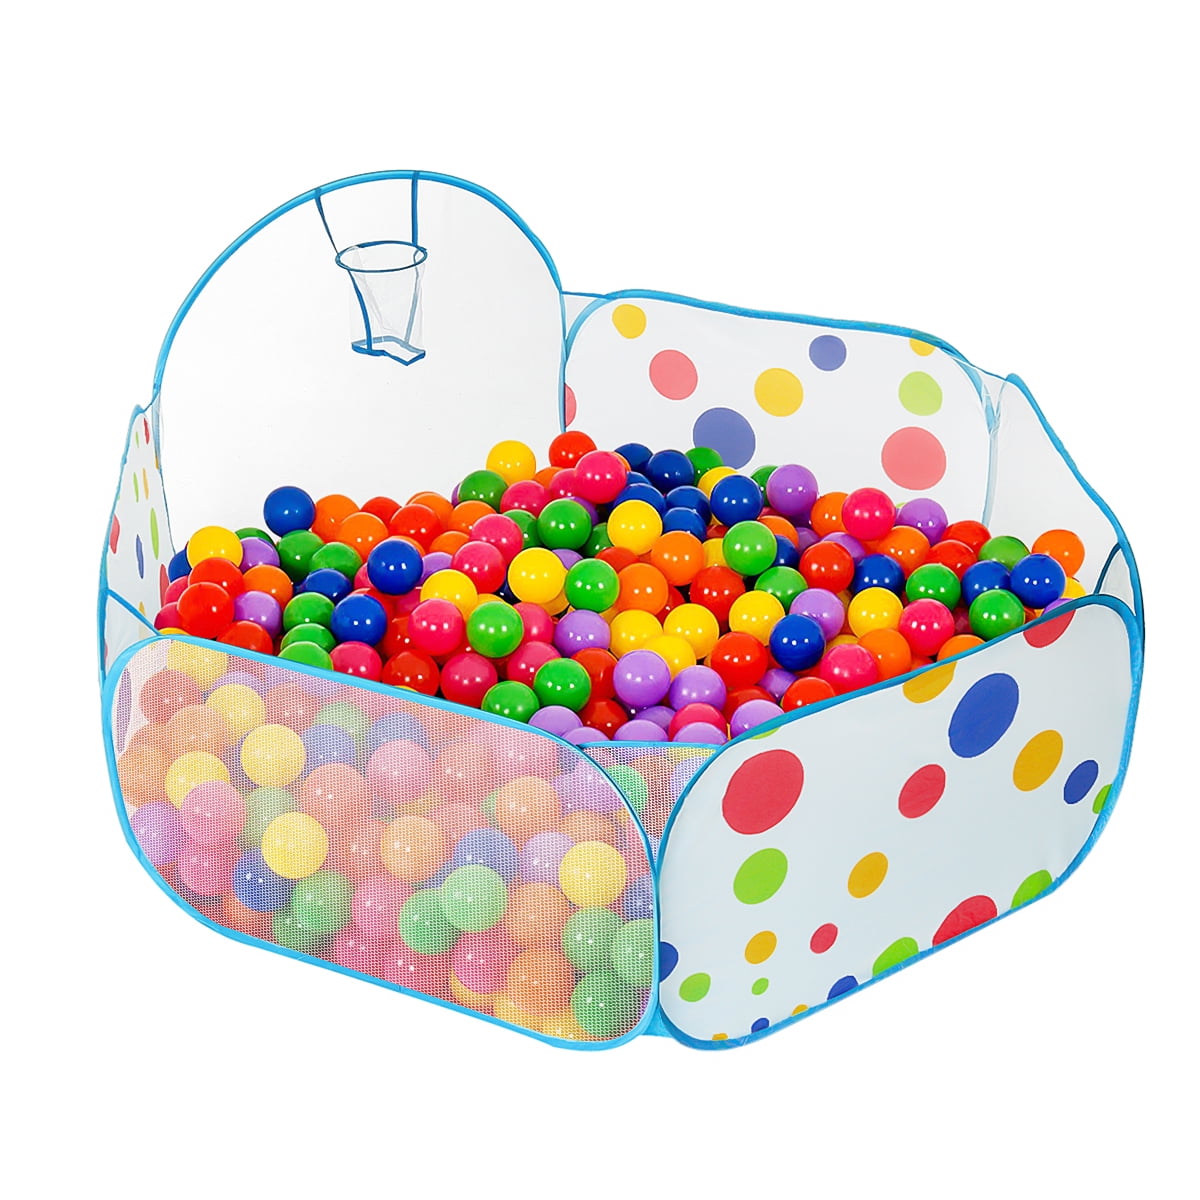 TTLOJ Kids Ball Pit Children Ball Pits Play Tent with Basketball Hoop for Toddle 